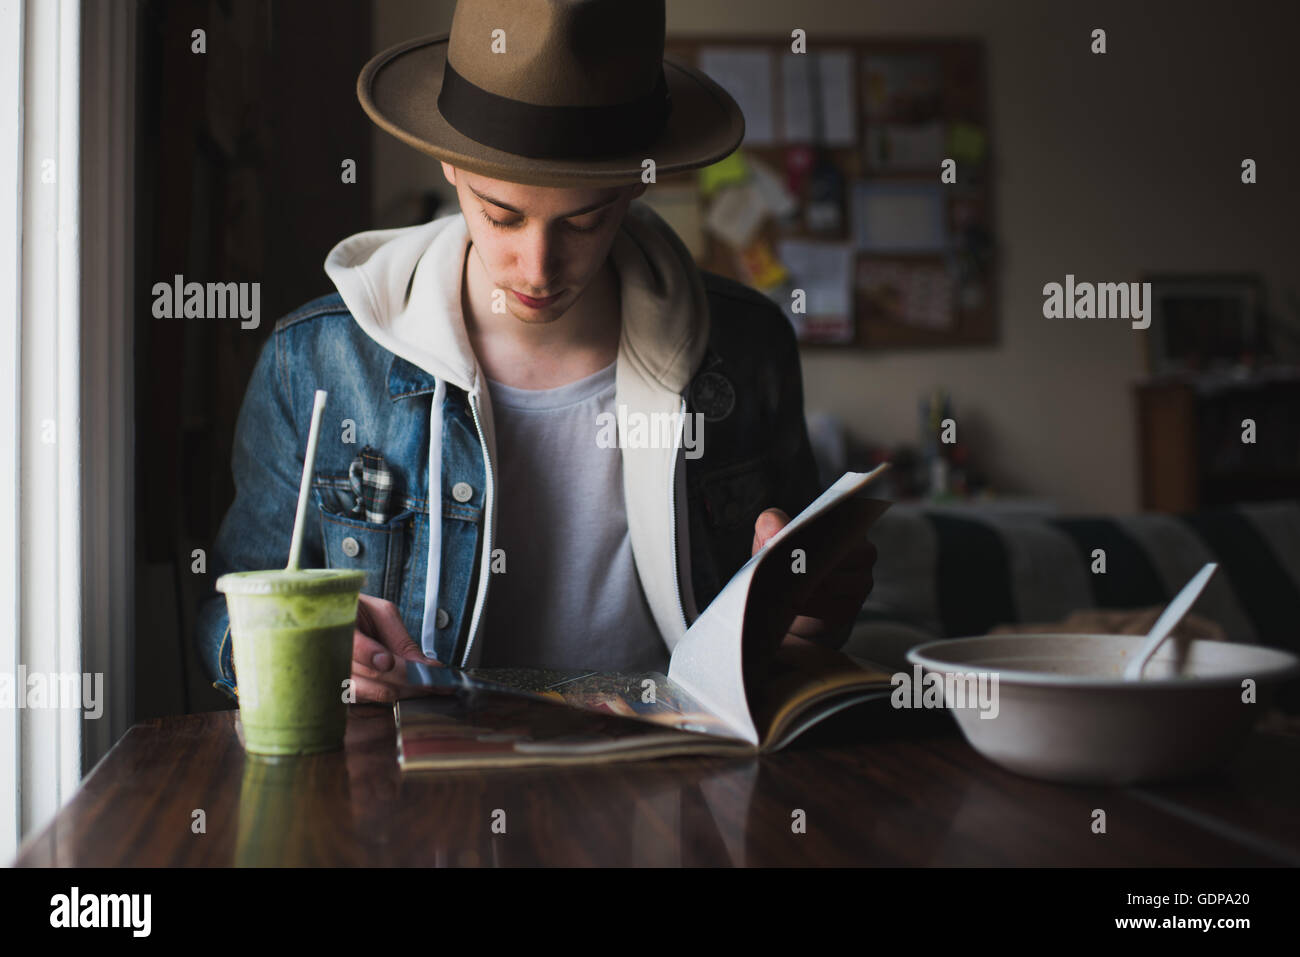 Young man sitting at table, having meal, reading magazine Stock Photo